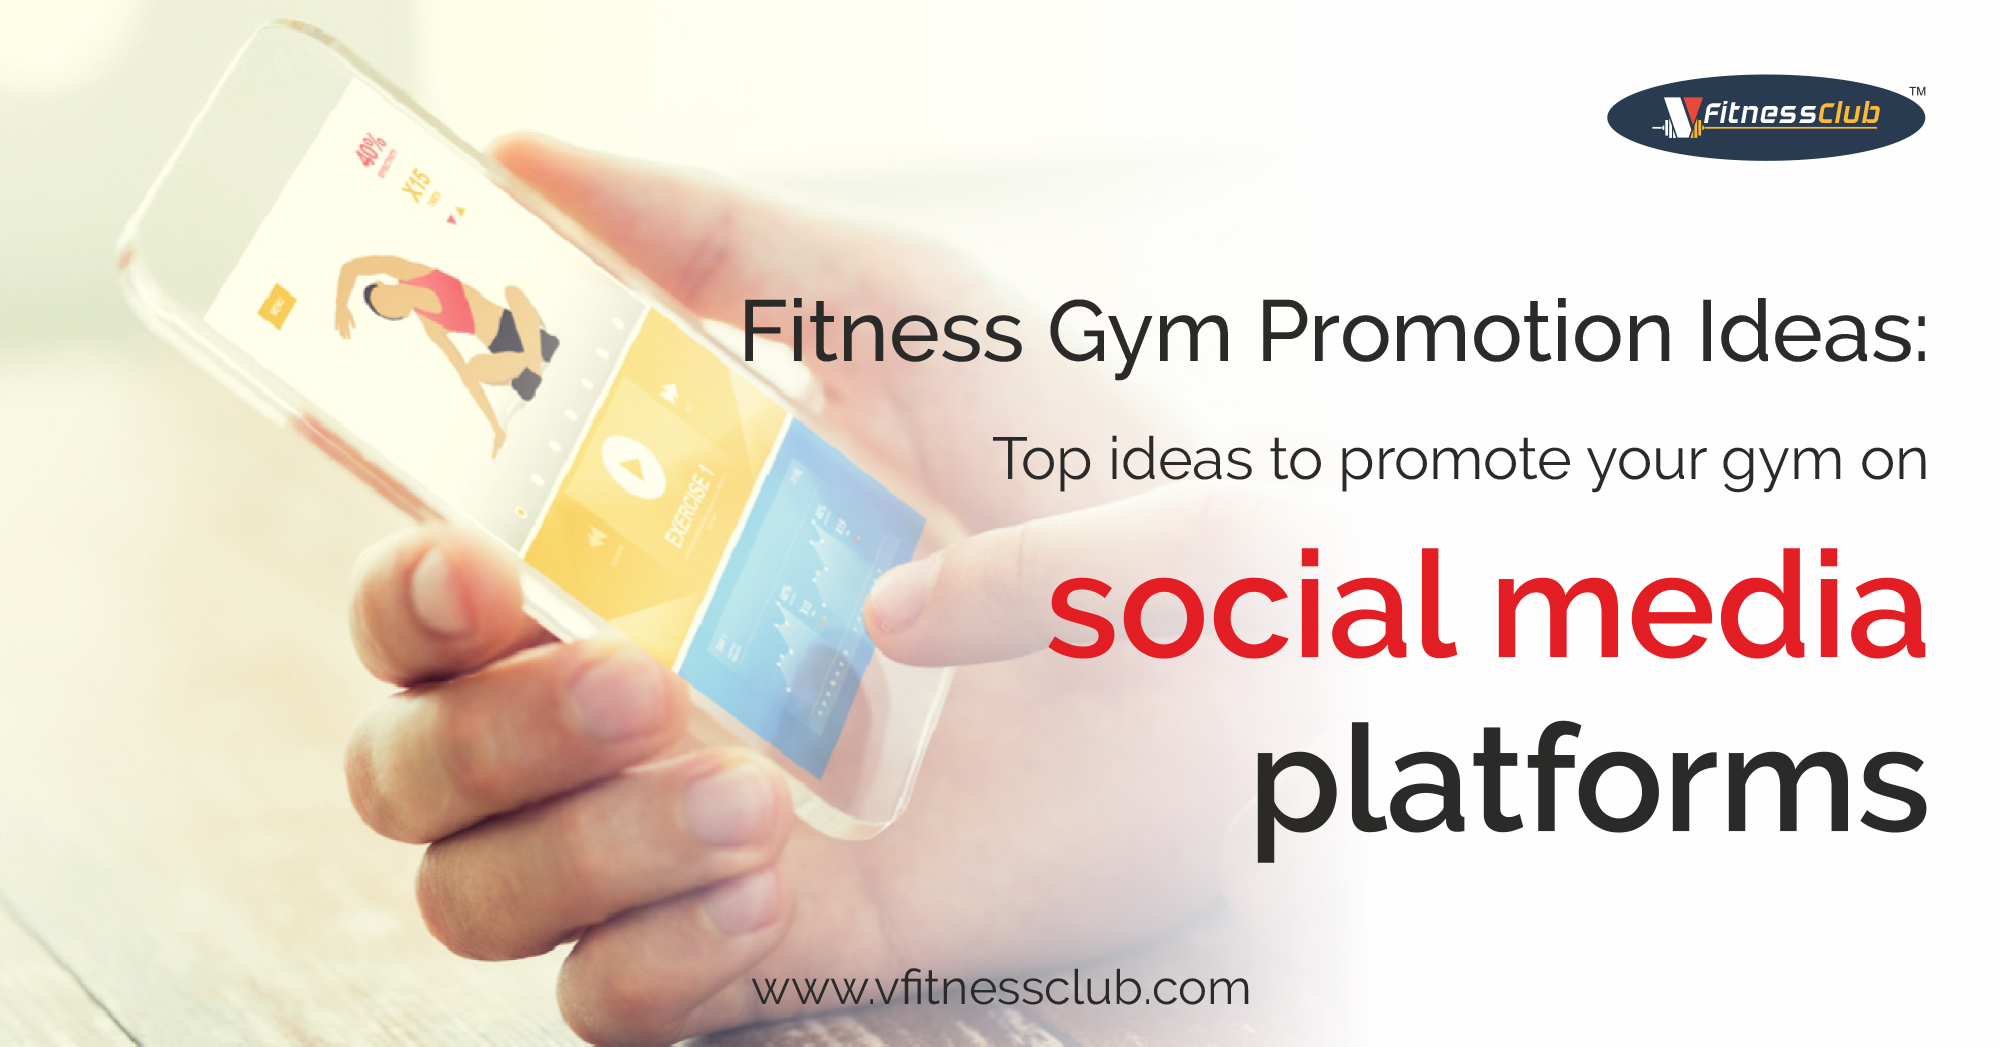 Fitness Gym Promotion Ideas: Top ideas to promote your gym on social media platforms